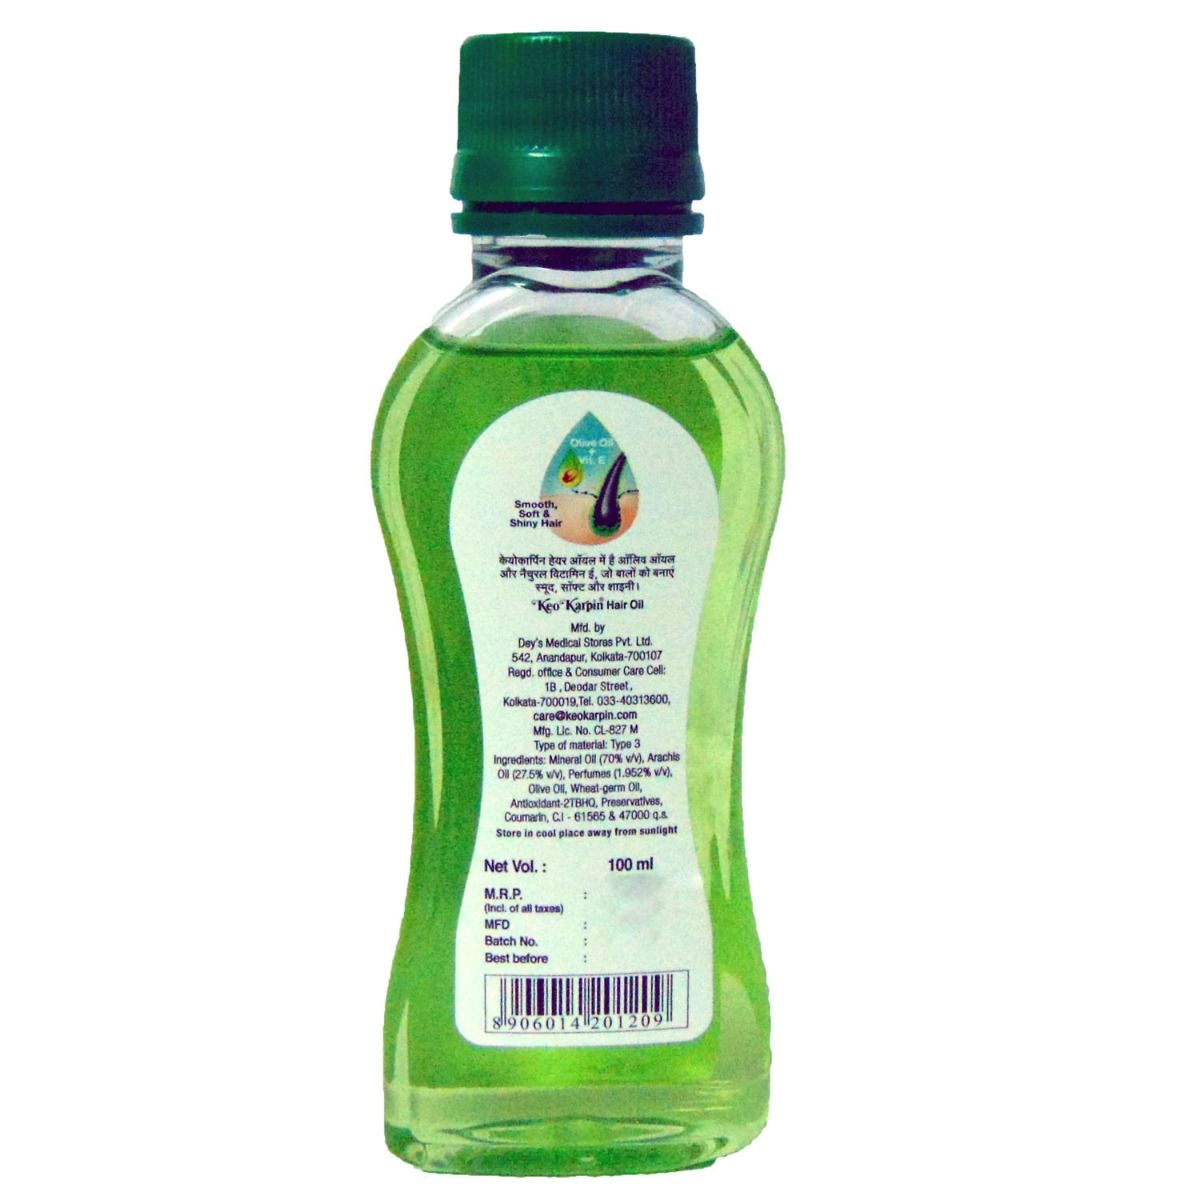 Keo Karpin Non Sticky Hair Oil Buy bottle of 500 ml Oil at best price in  India  1mg